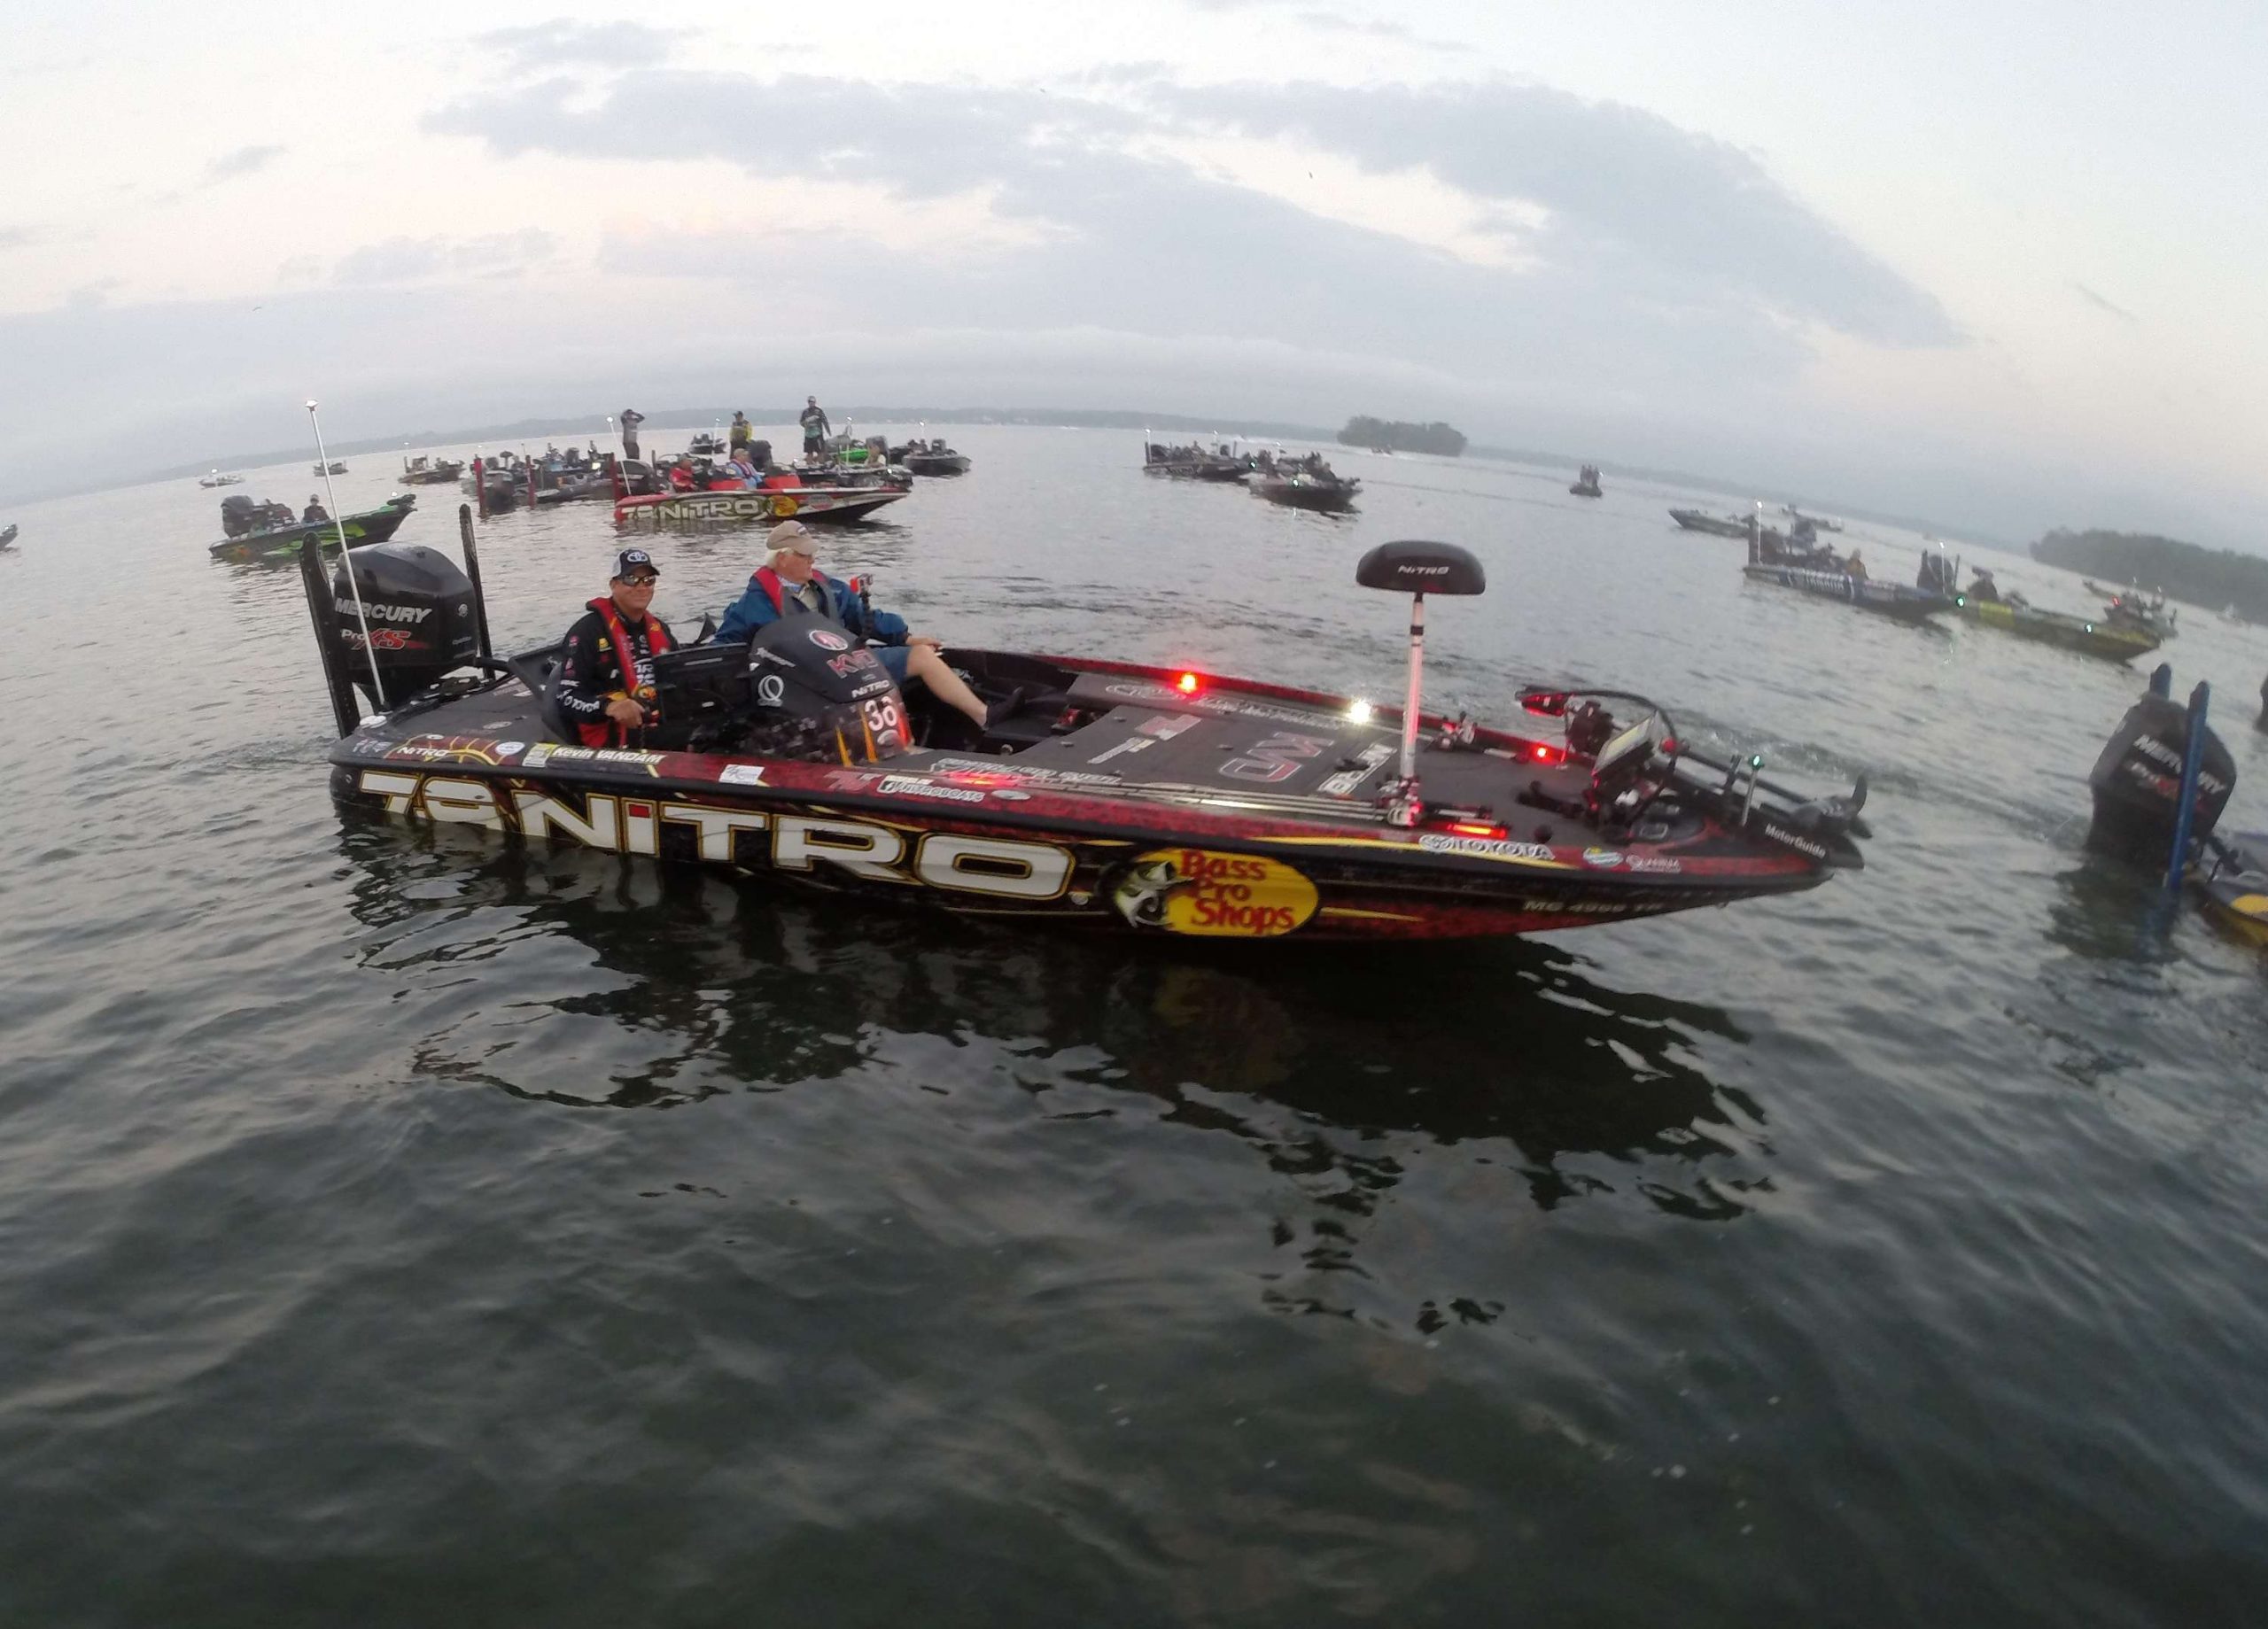 Almost go time for Kevin VanDam.